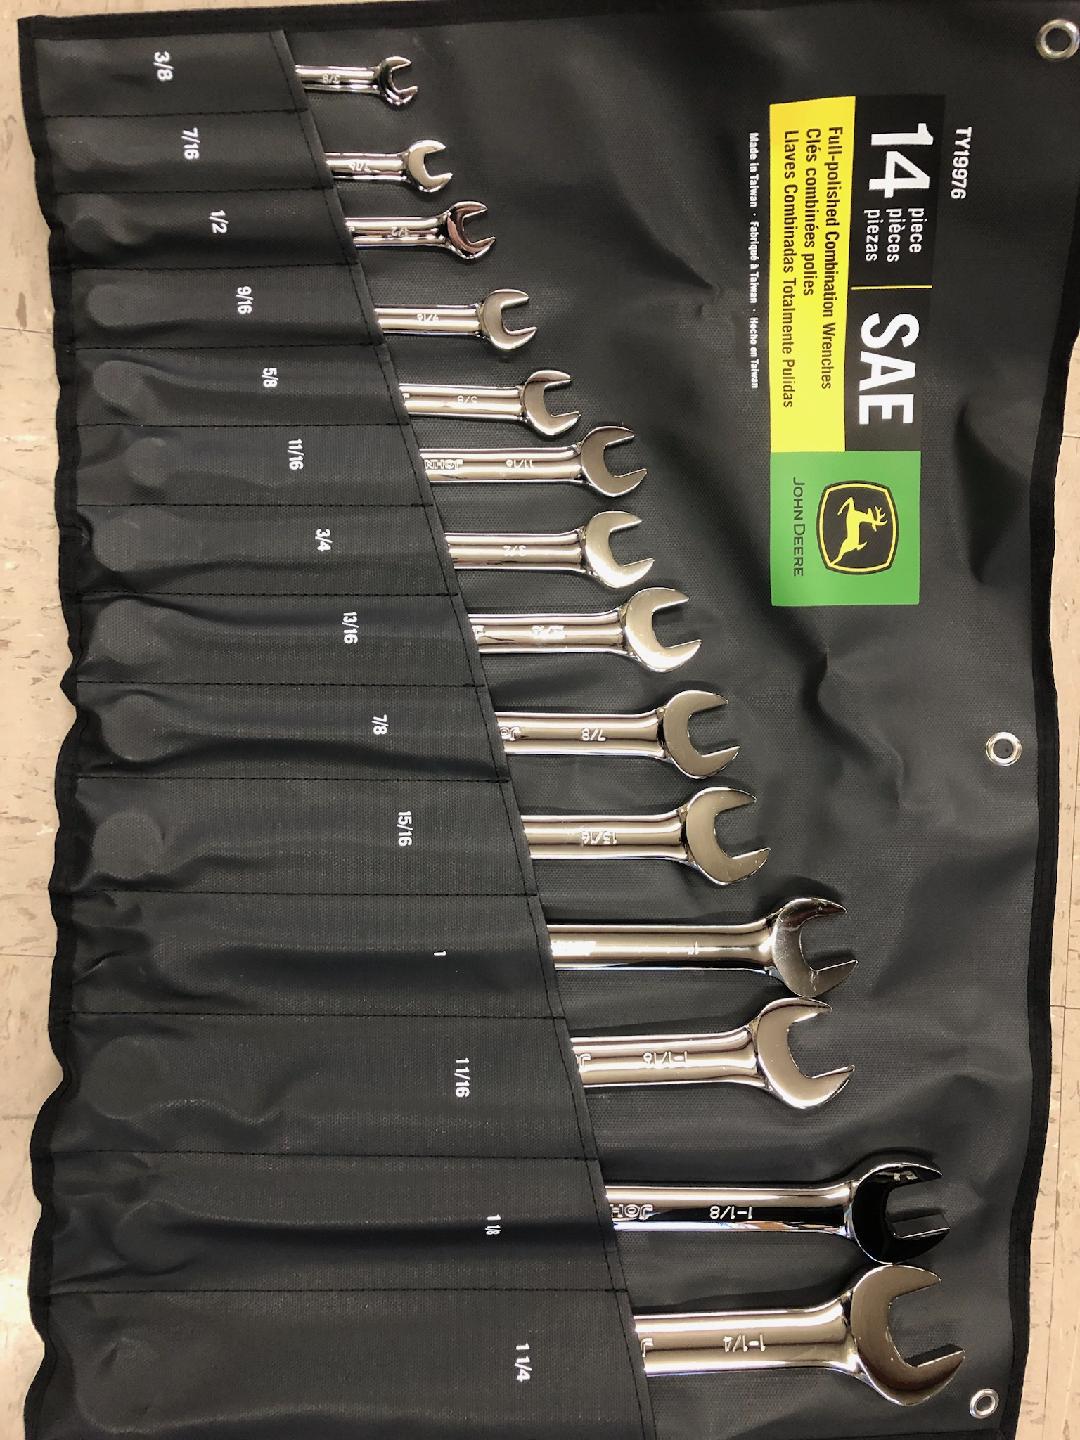 John Deere SAE 14 Piece Standard Combination Wrenches